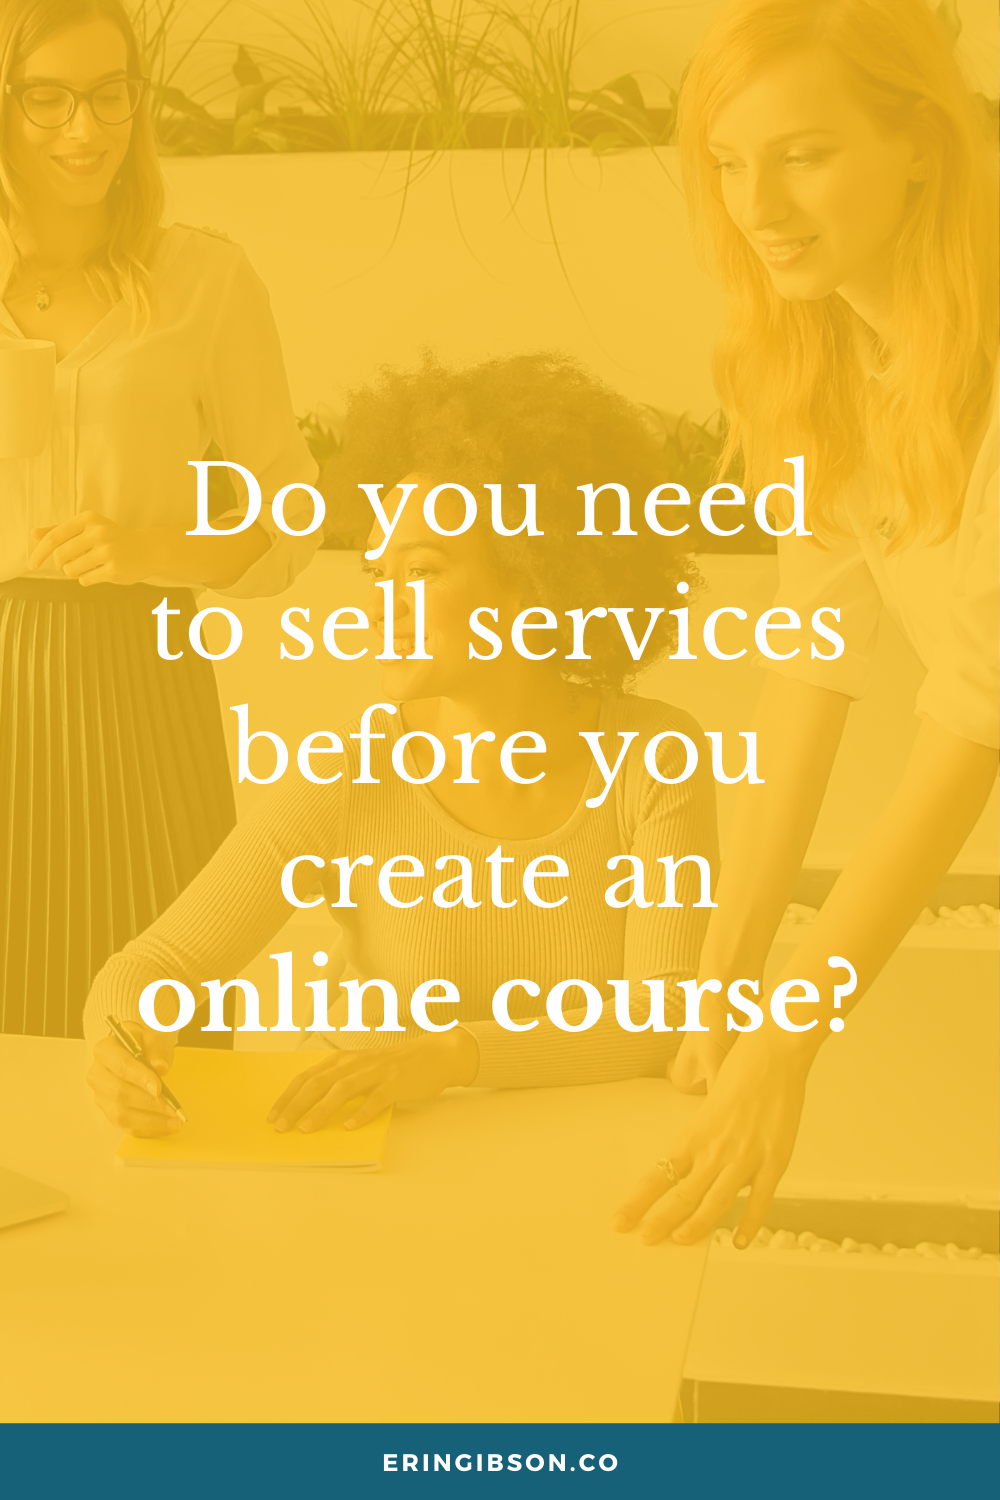 Do you need to sell services before launching an online course?